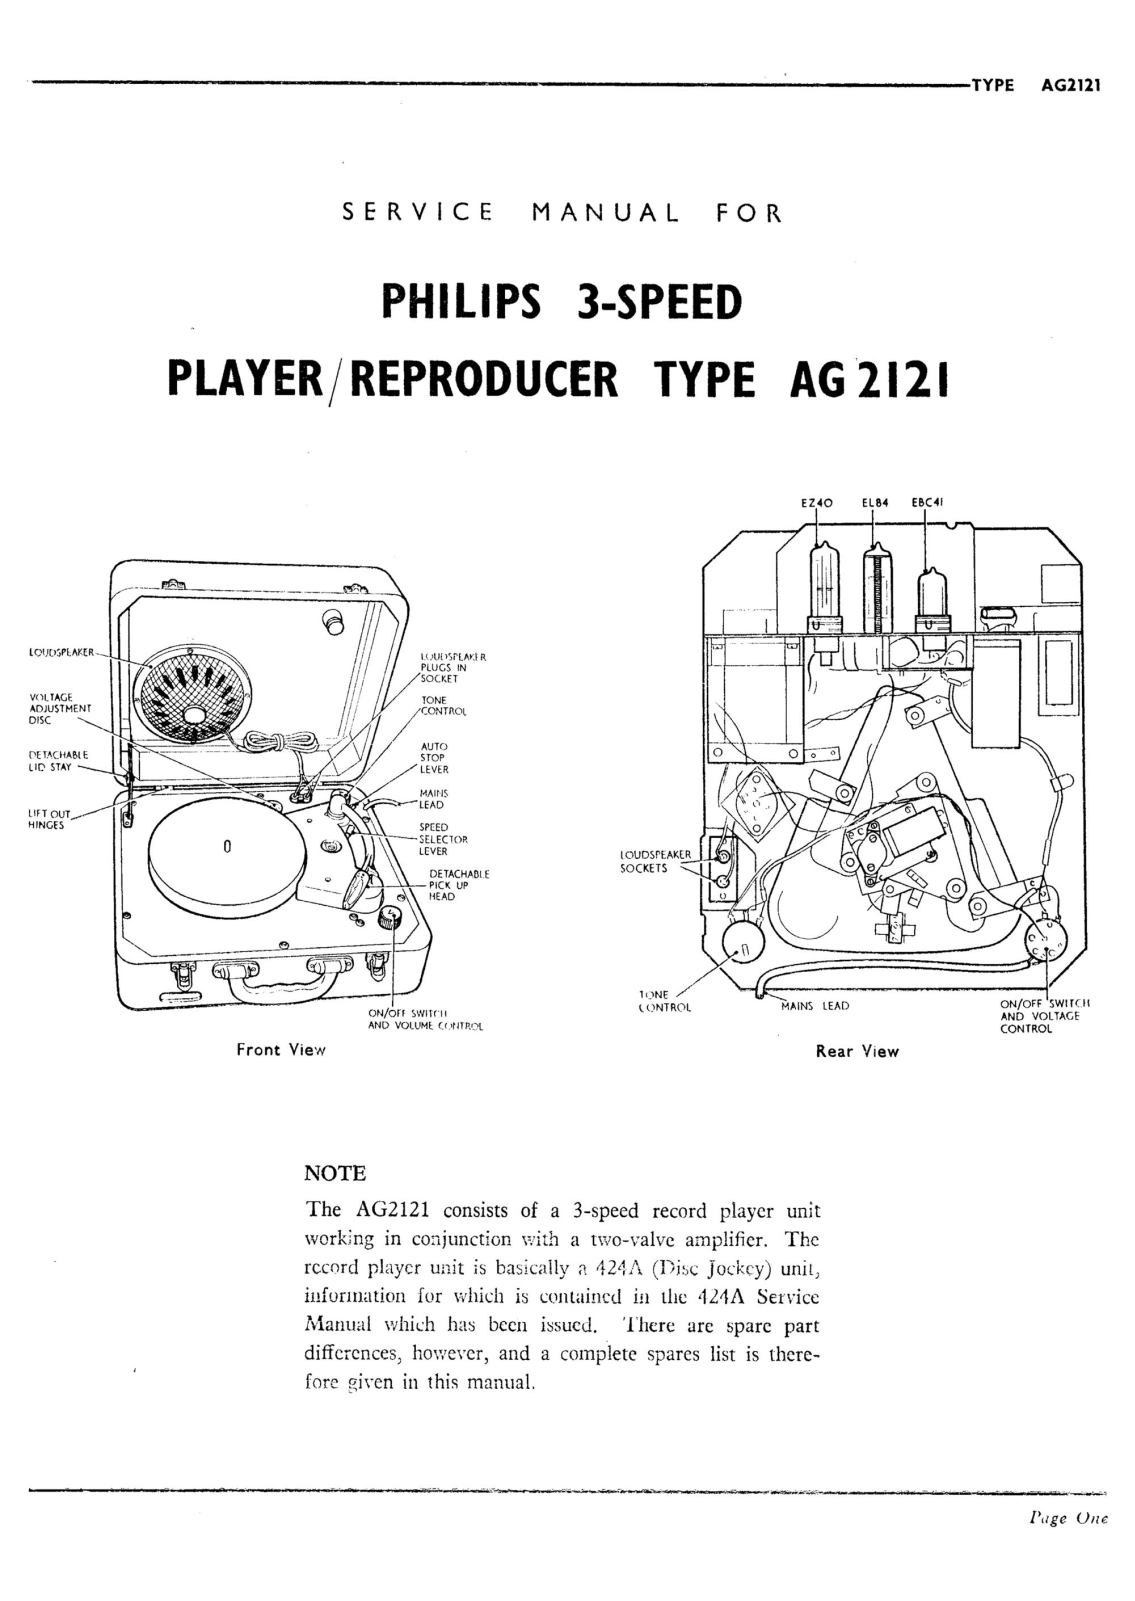 Philips AG-2121 Service Manual